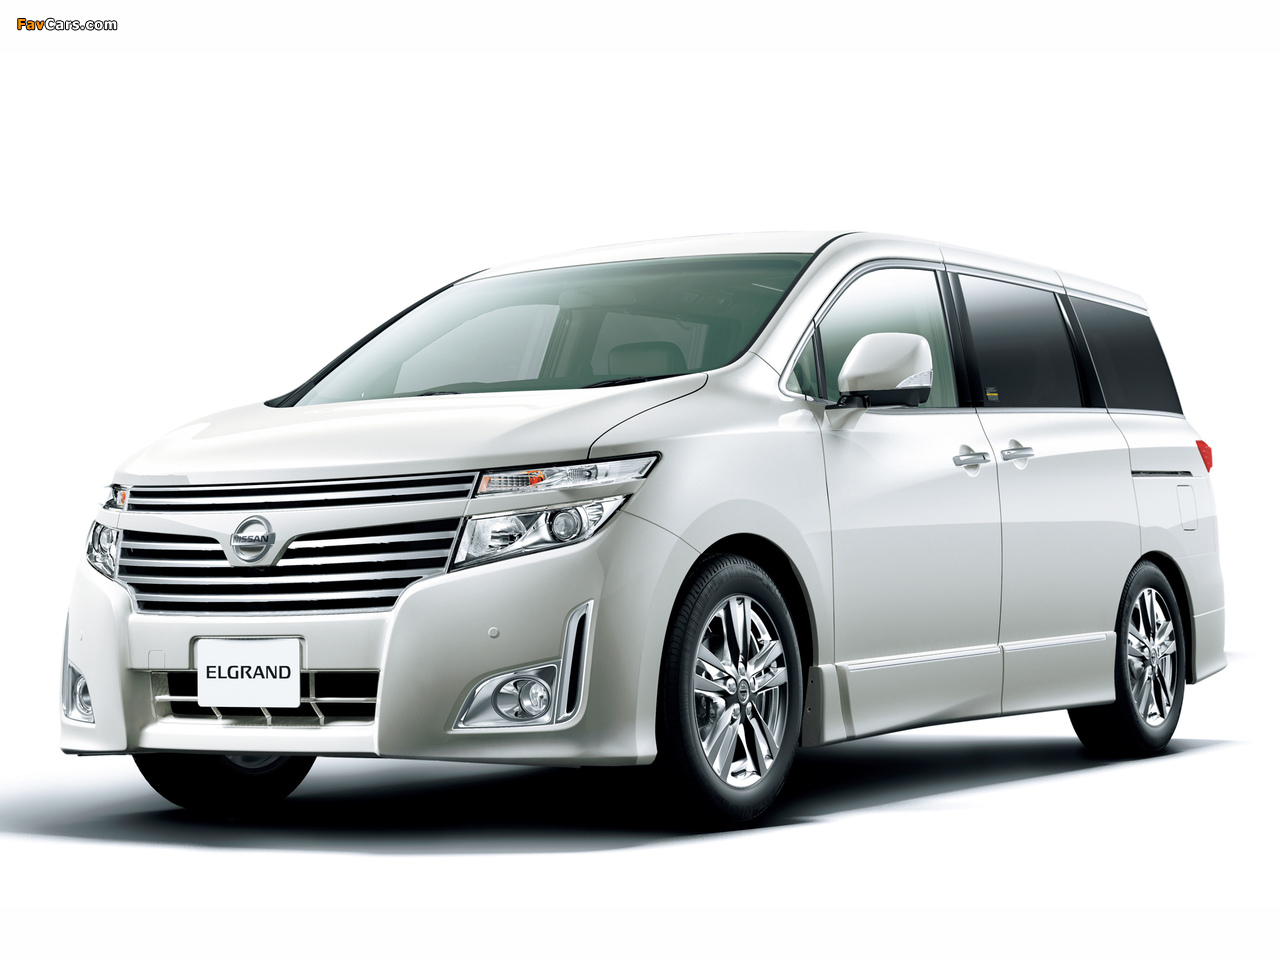 Nissan Elgrand Highway Star (E52) 2010 images (1280 x 960)